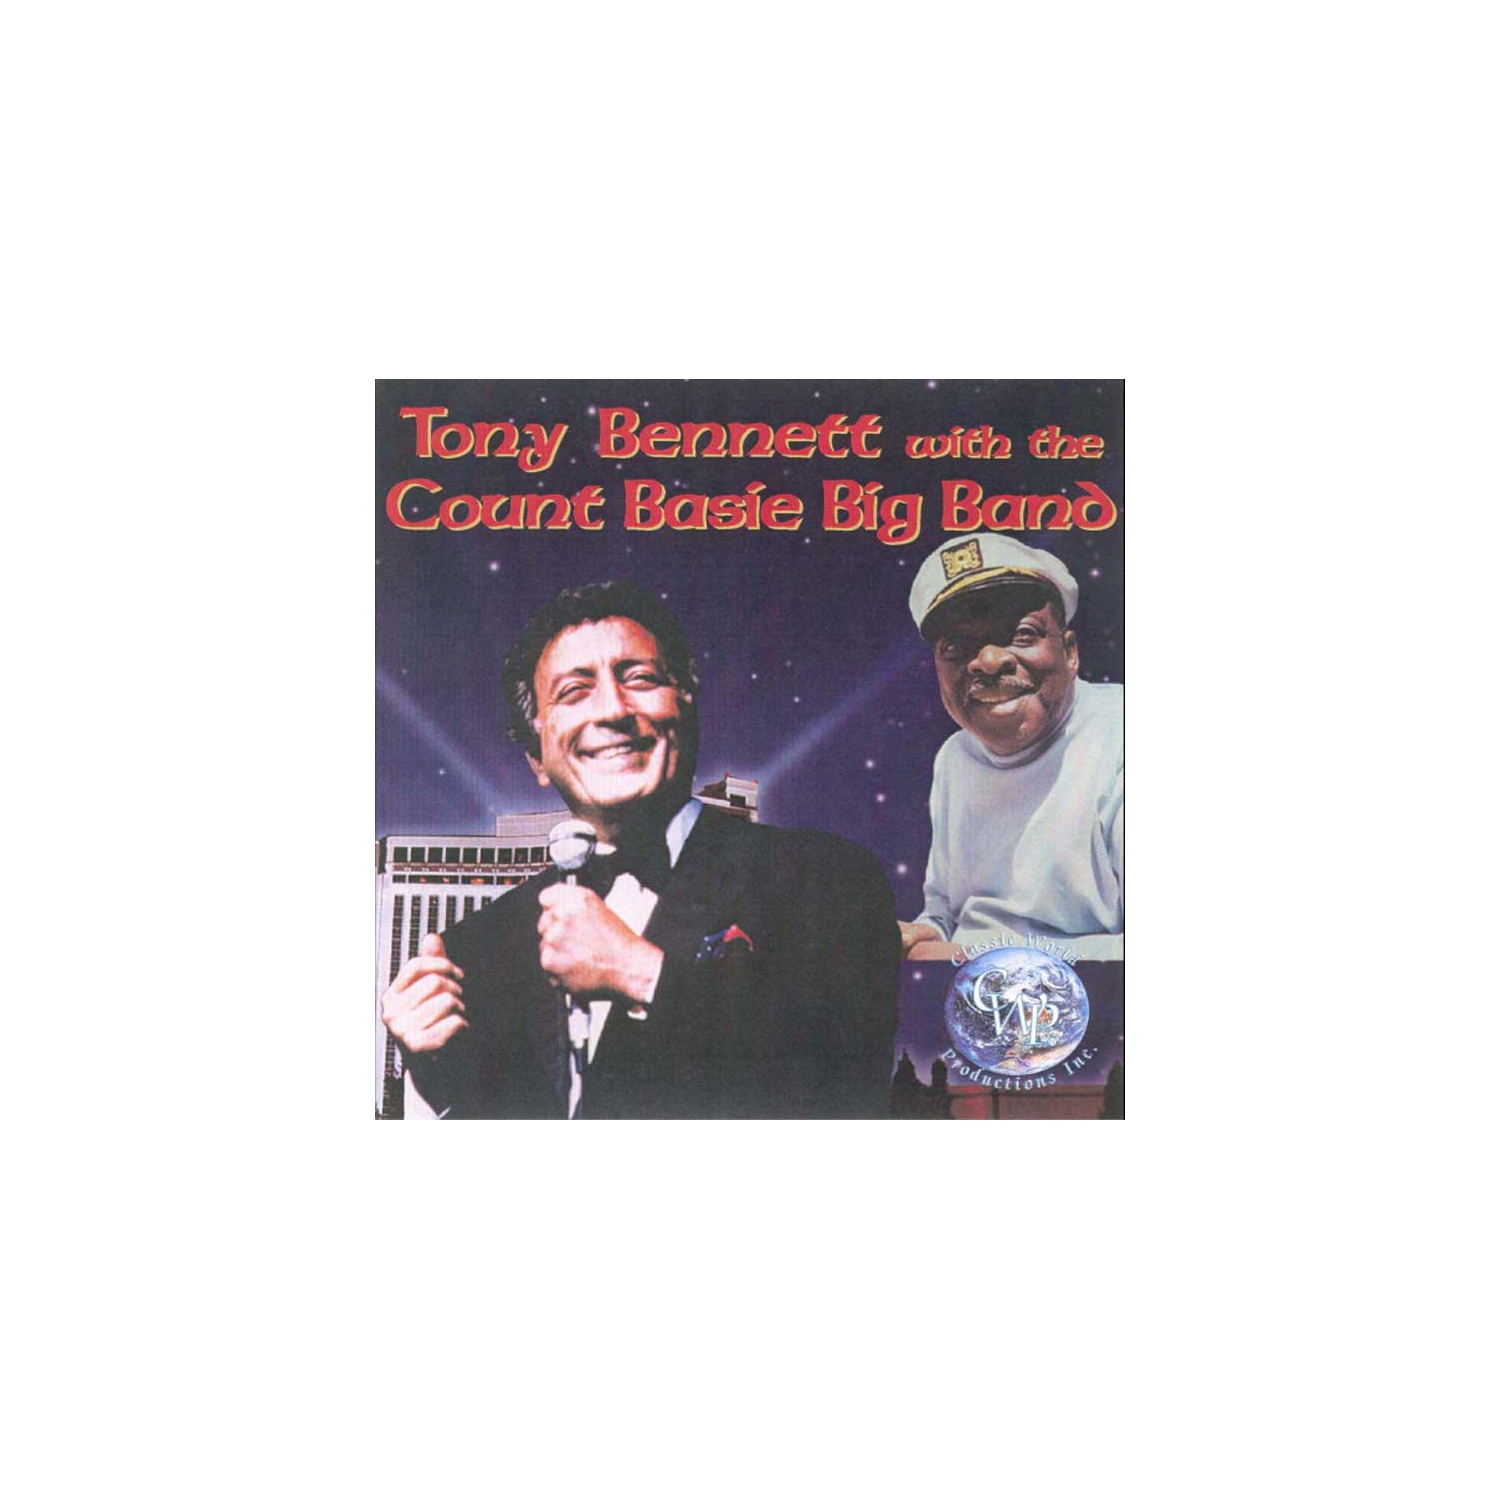 Tony Bennett With Count Basie Big Band [Audio CD] Tony Bennett and Count Basie Big Band